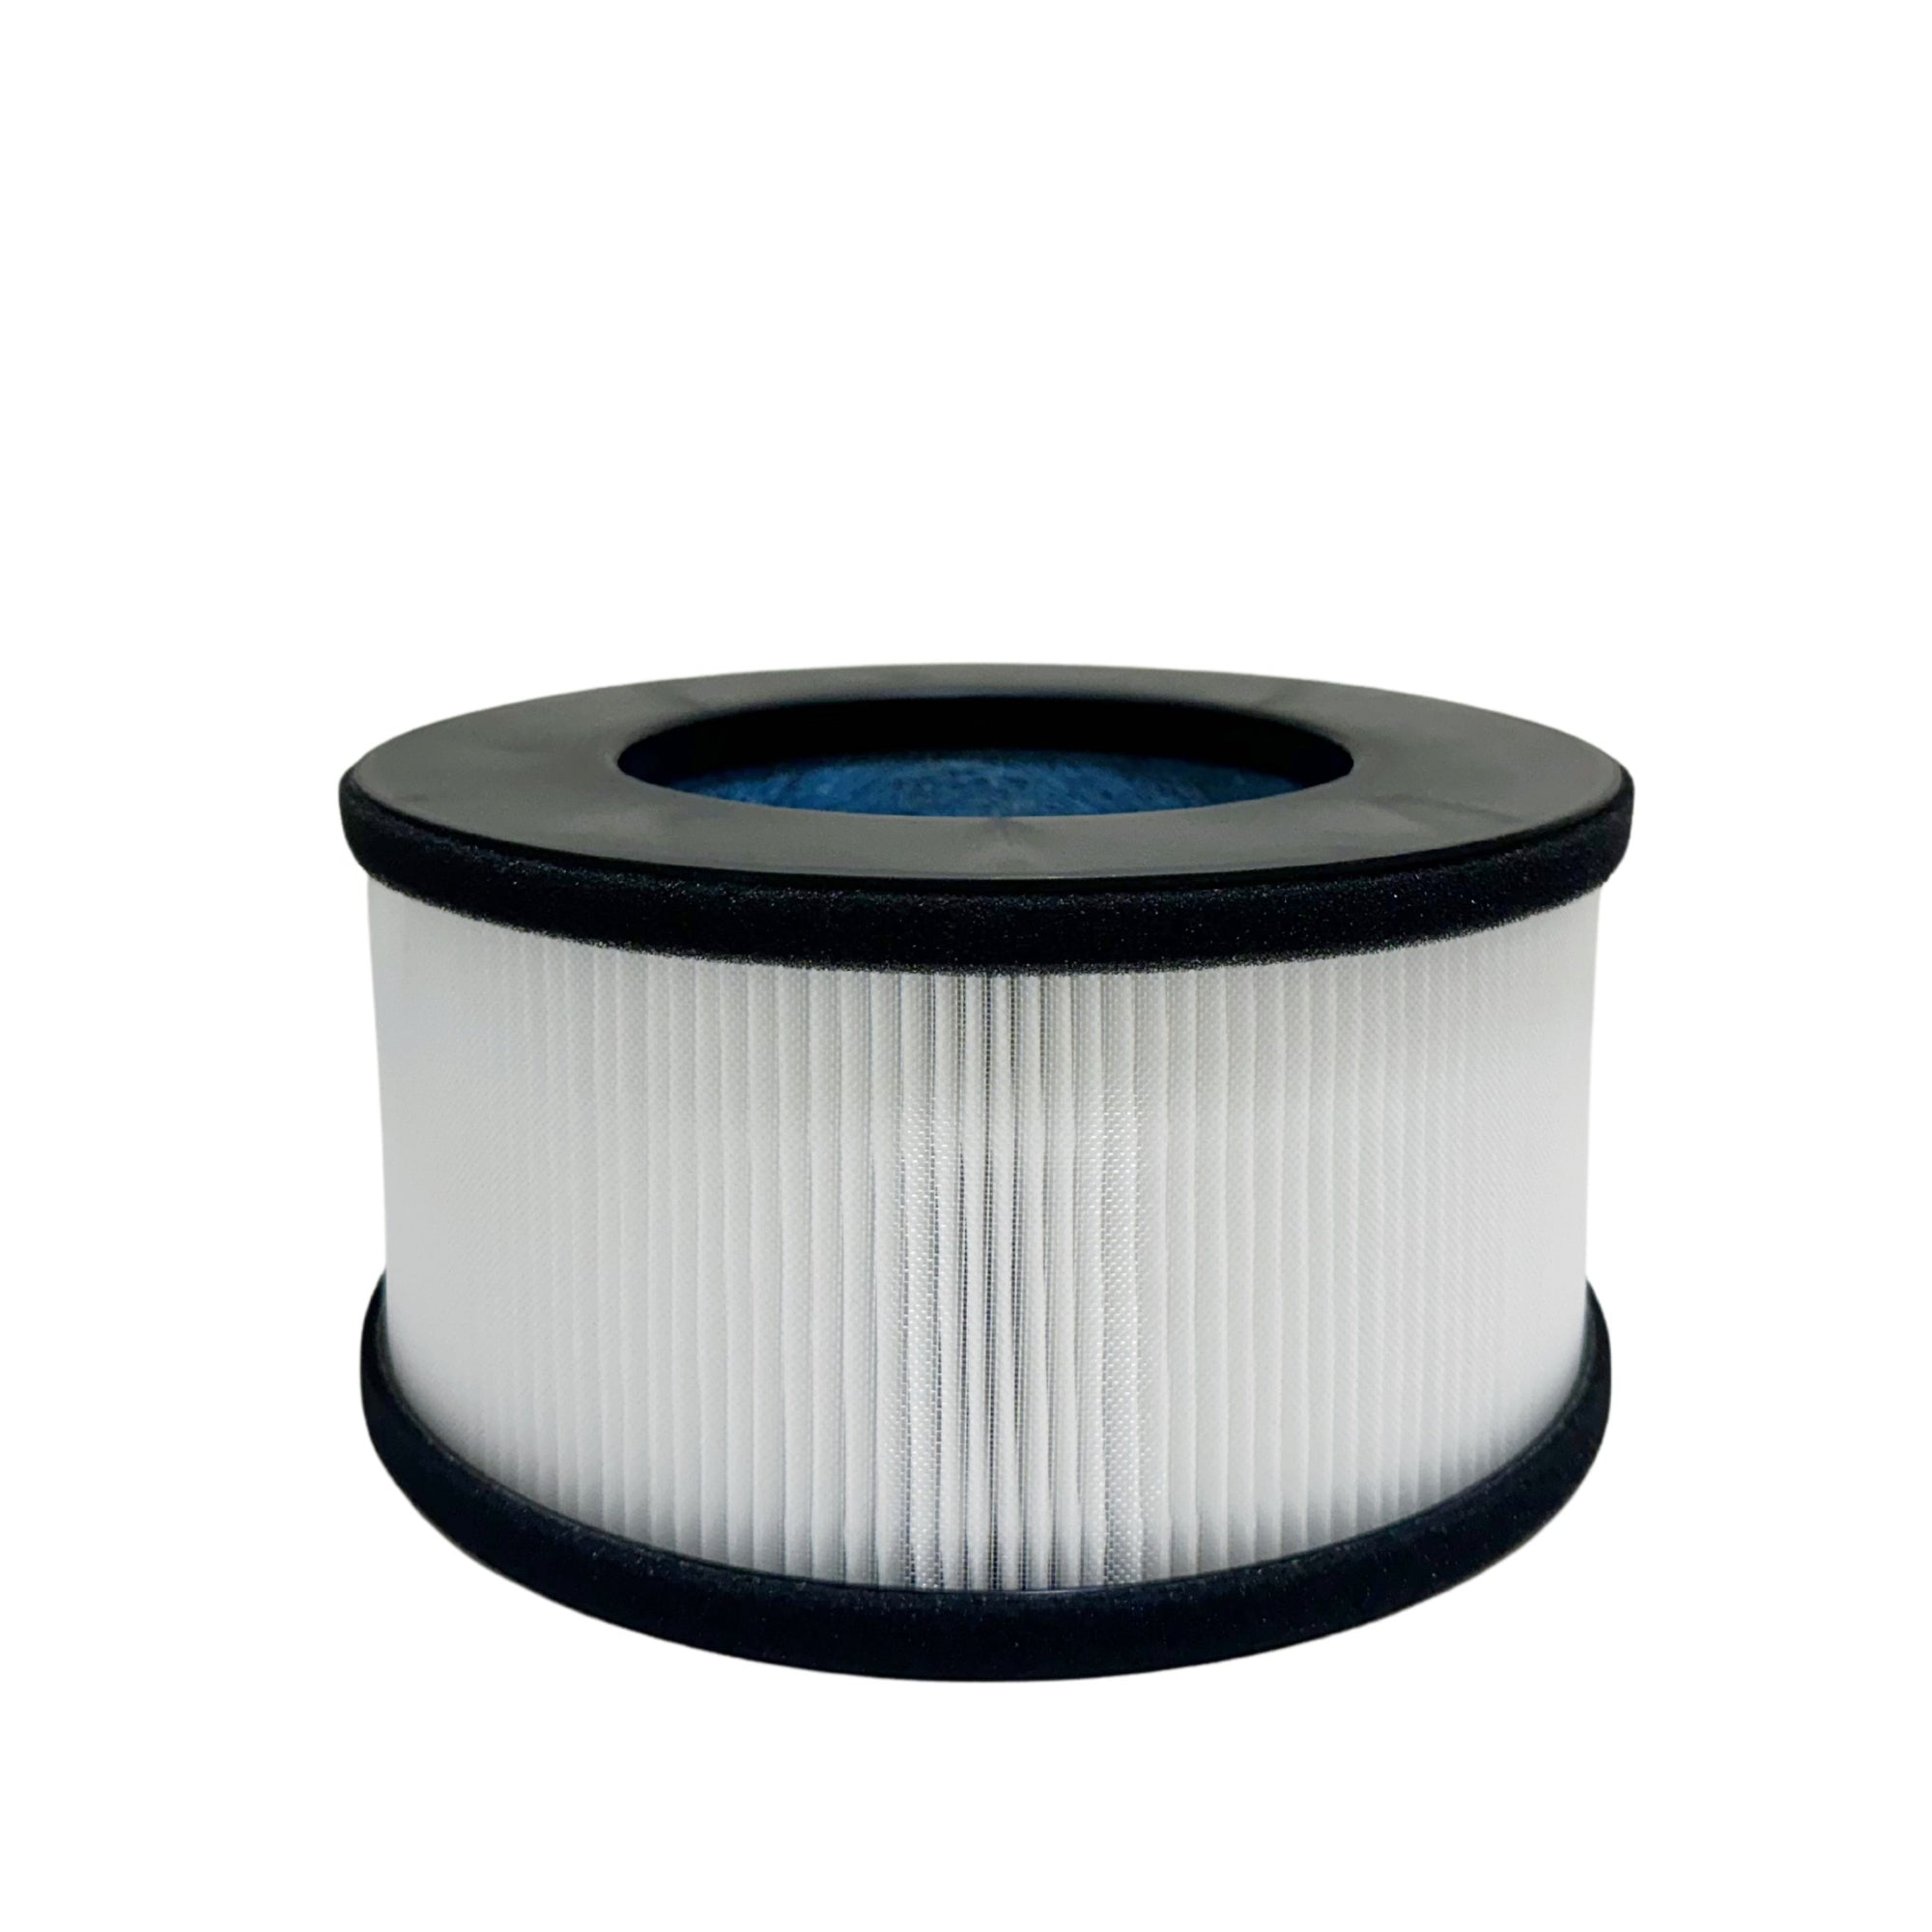 Nispira AF-3222 True HEPA Replacement Filter | Compatible with Bulex AF-3222 HEPA Air Purifier